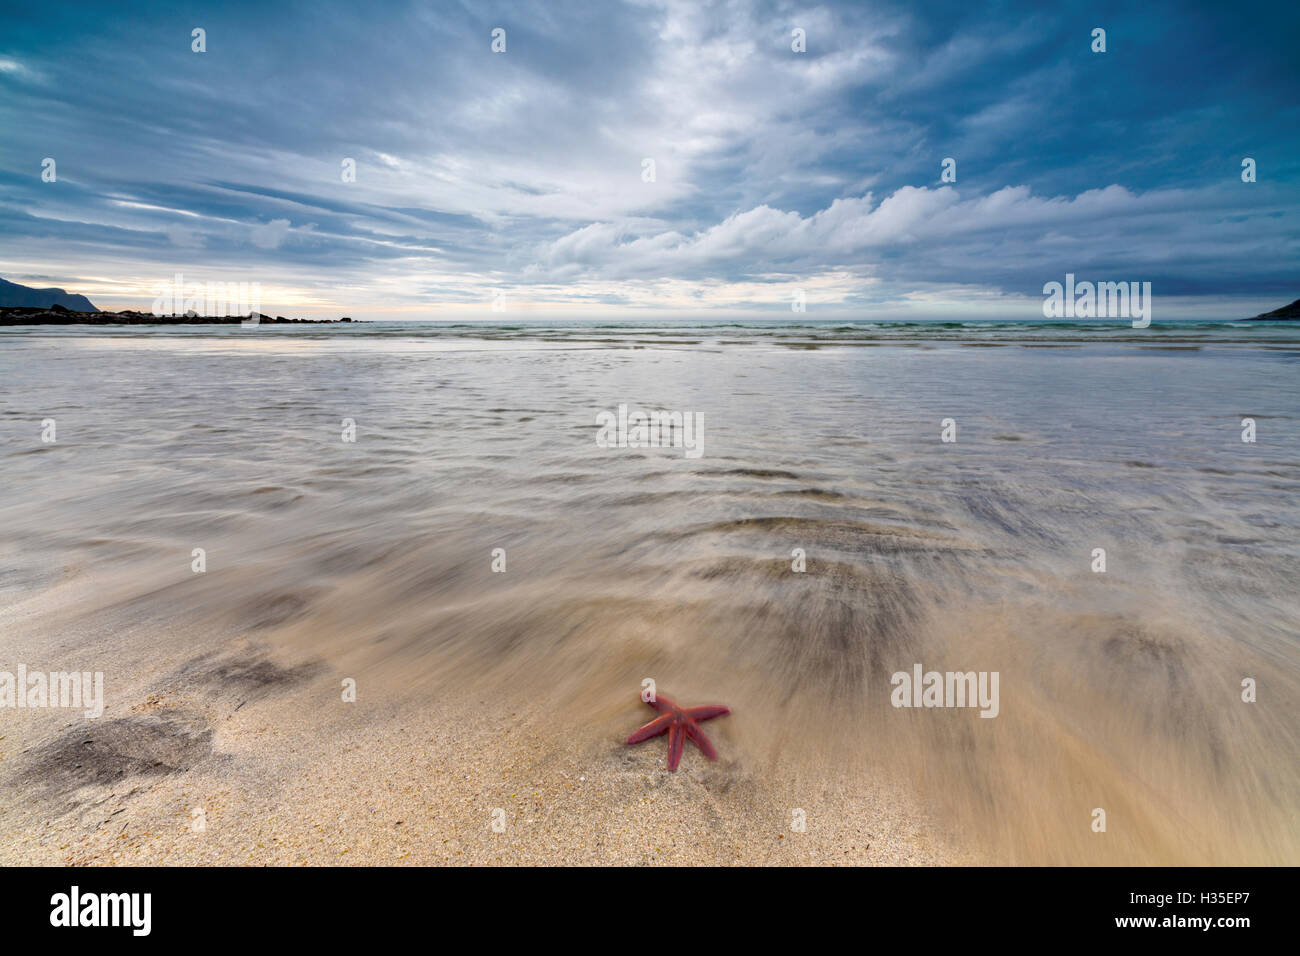 Sea star in the clear water of the fine sandy beach, Skagsanden,  Ramberg, Nordland county, Lofoten Islands, Arctic, Norway Stock Photo